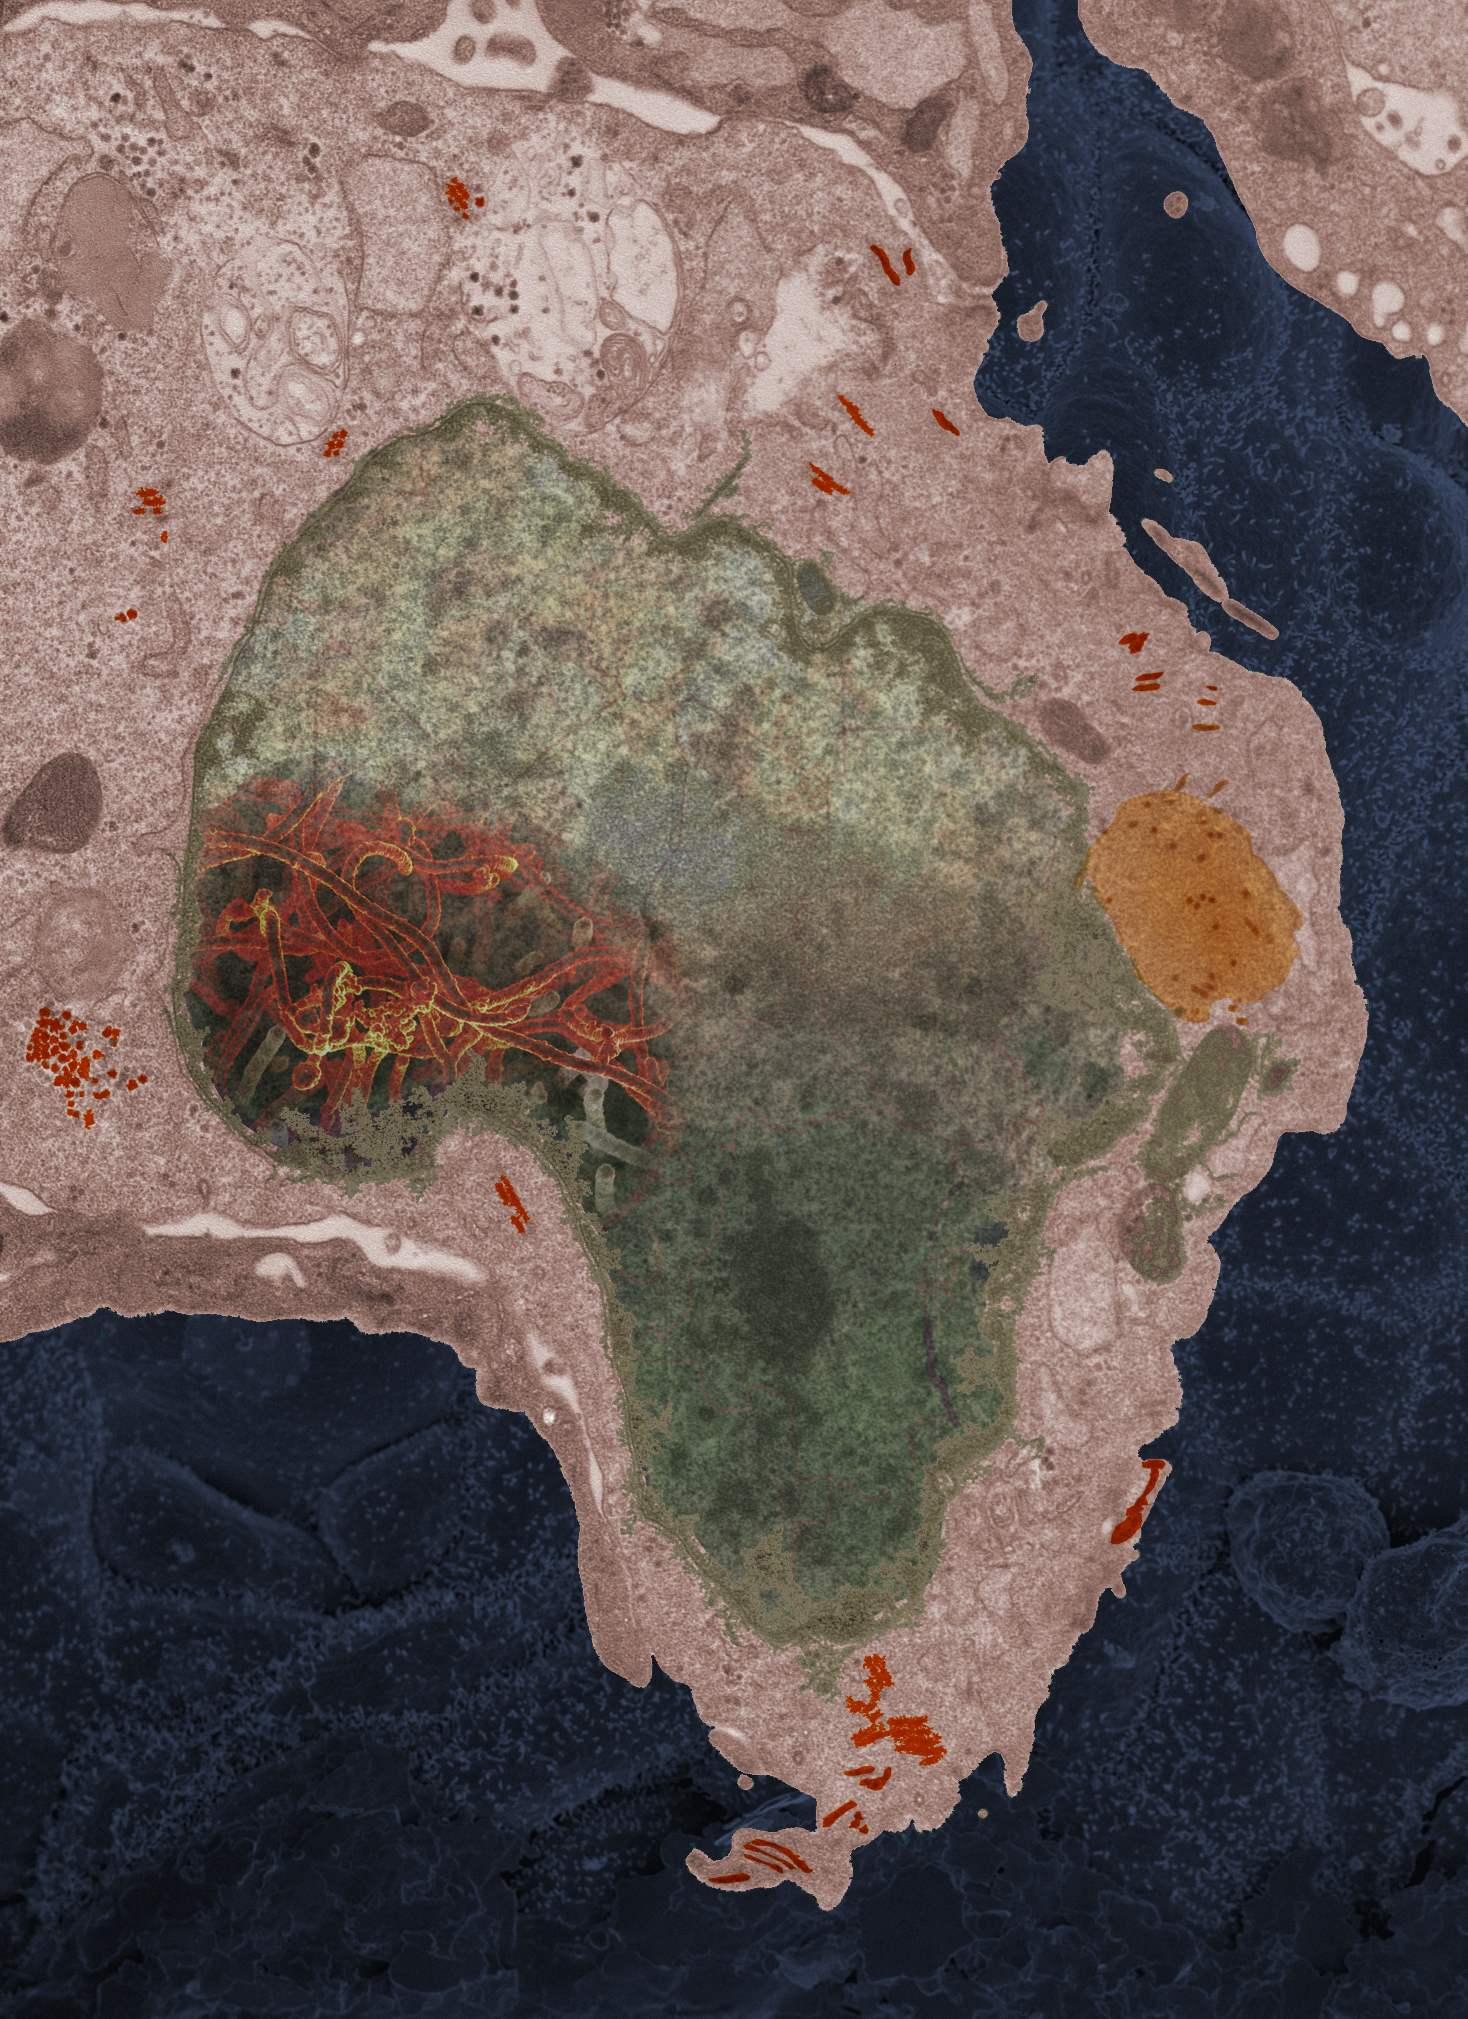 In 2014, Elizabeth Fischer received a sample of Ebola from a 2-year-old girl in Mali. The cell border and nucleus shape resemble the shape of Africa. (Courtesy of Elizabeth Fischer)